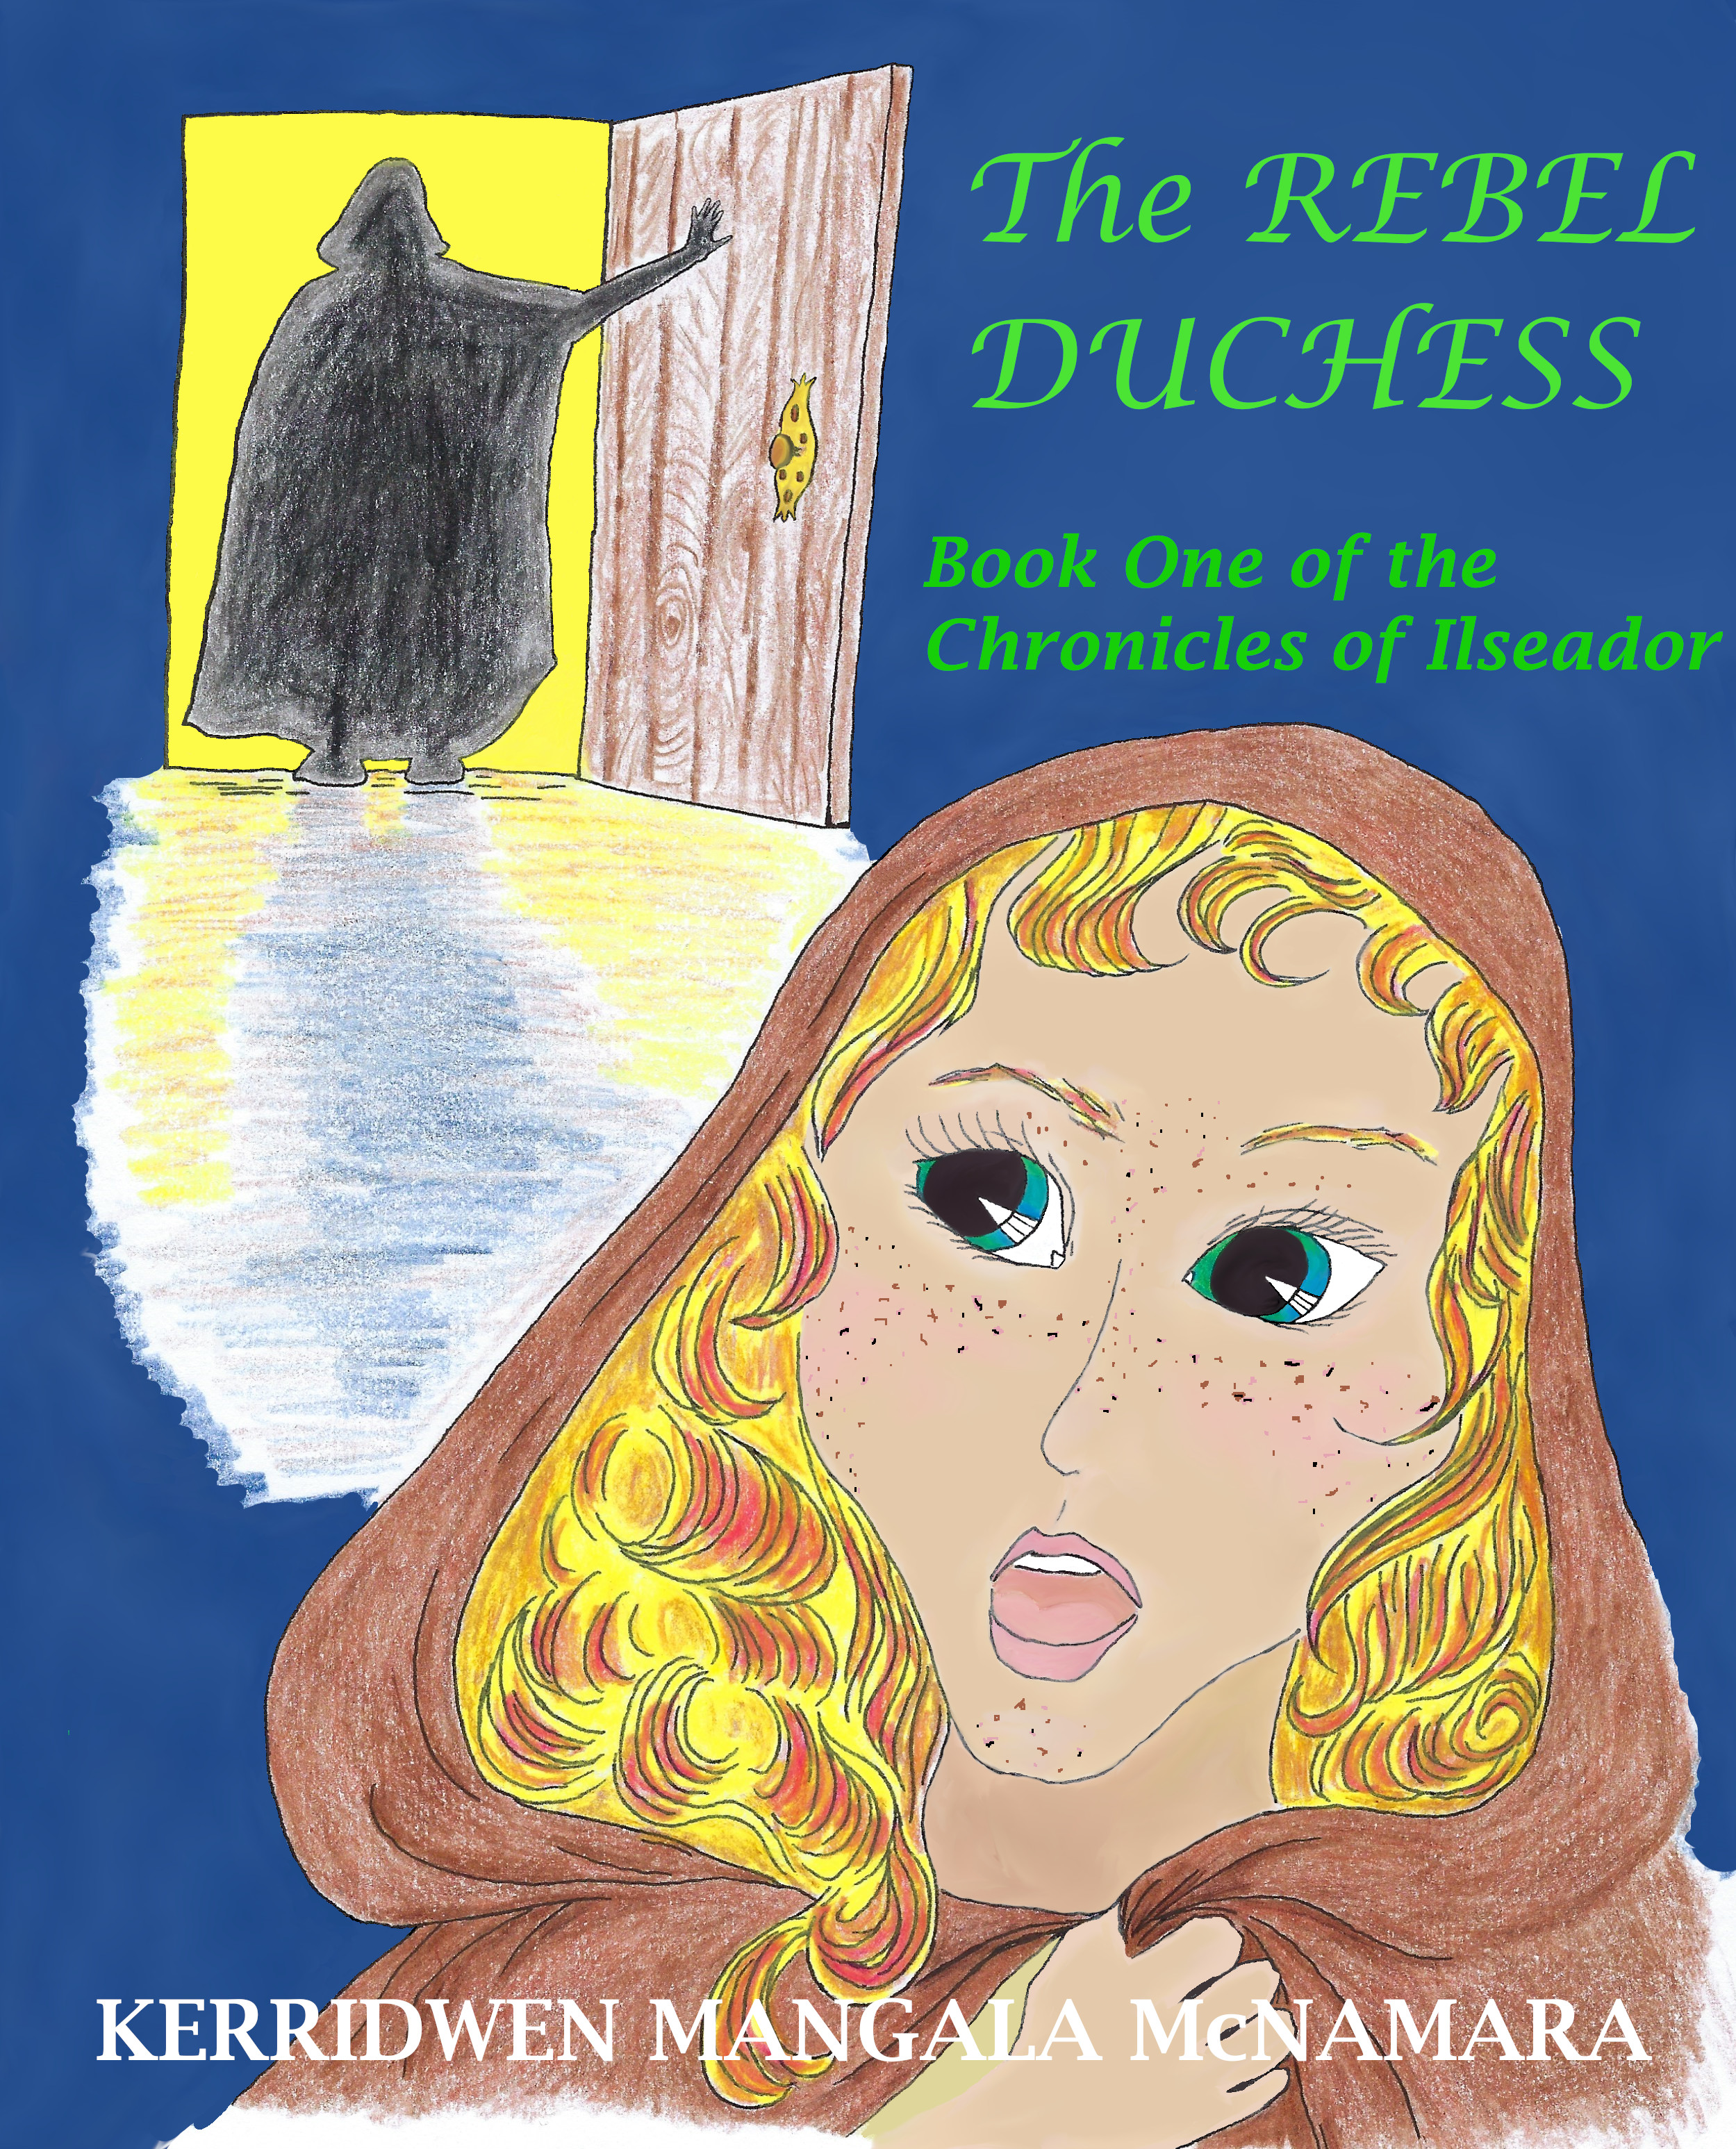 Cover for book: The Rebel Duchess, Book One of the Chronicles of Ilseador